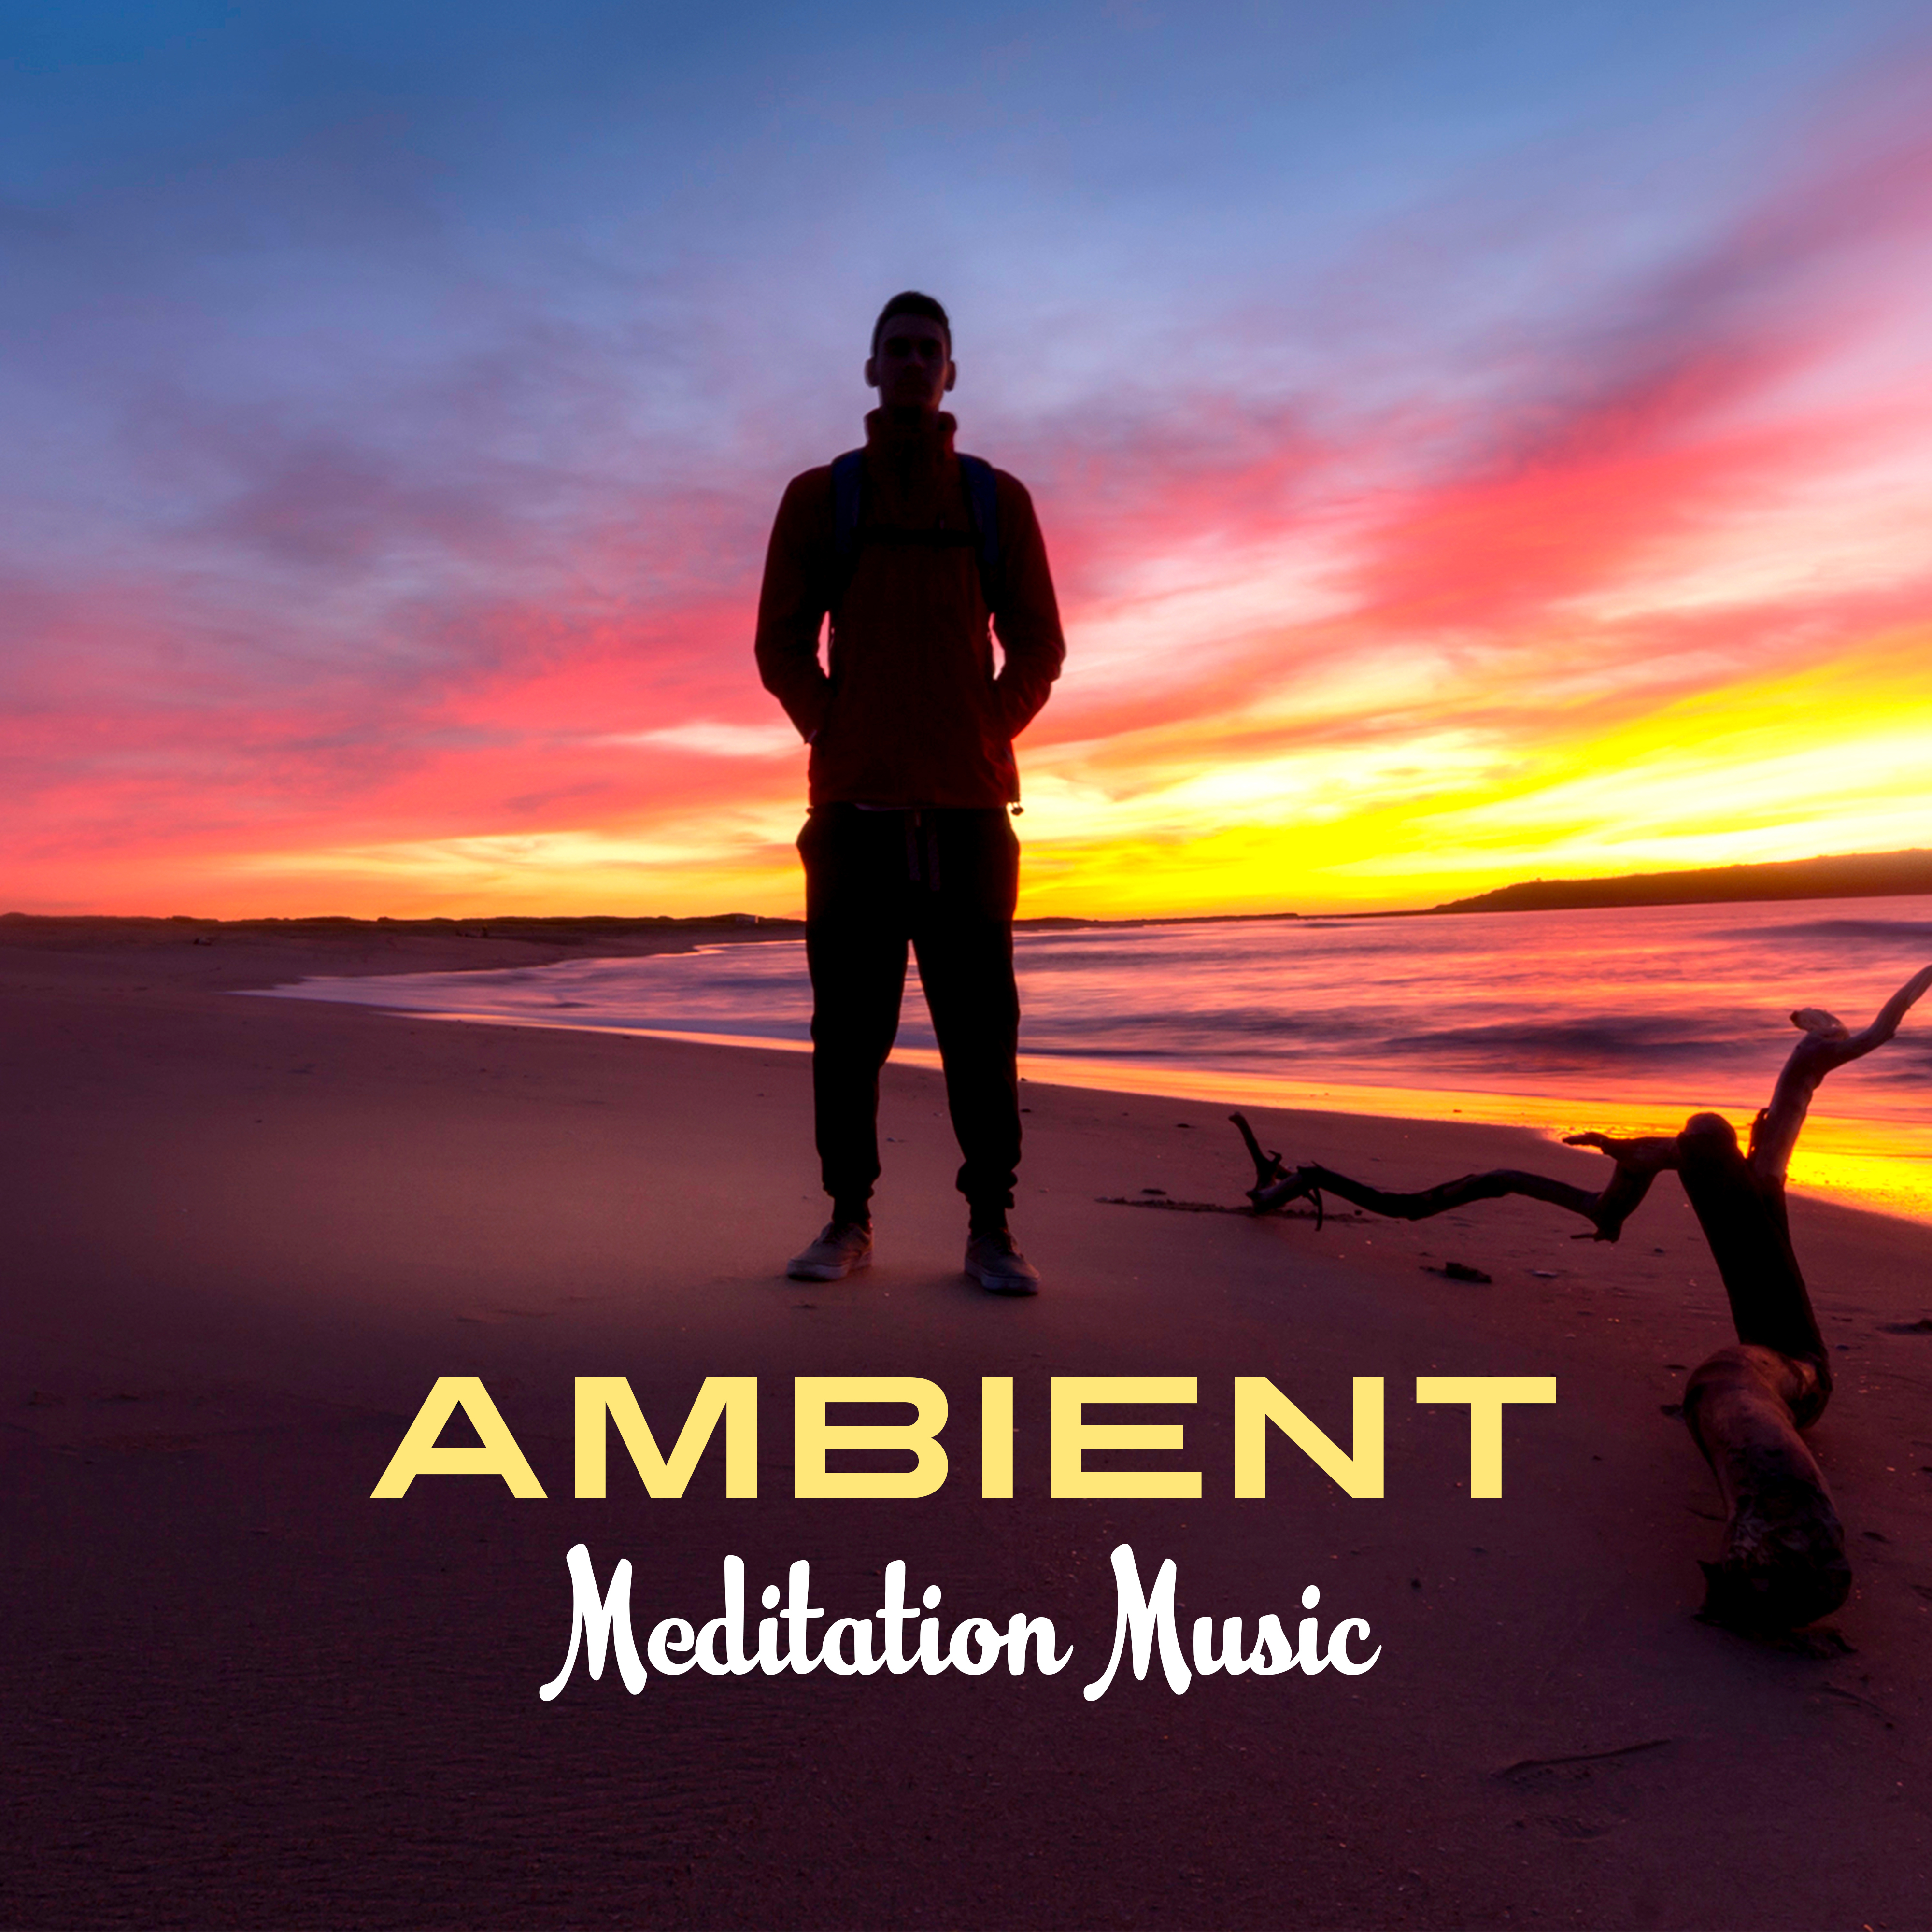 Ambient Meditation Music – Calm Sounds to Meditate, Peaceful Songs, New Age Meditation Tracks, Buddha Lounge